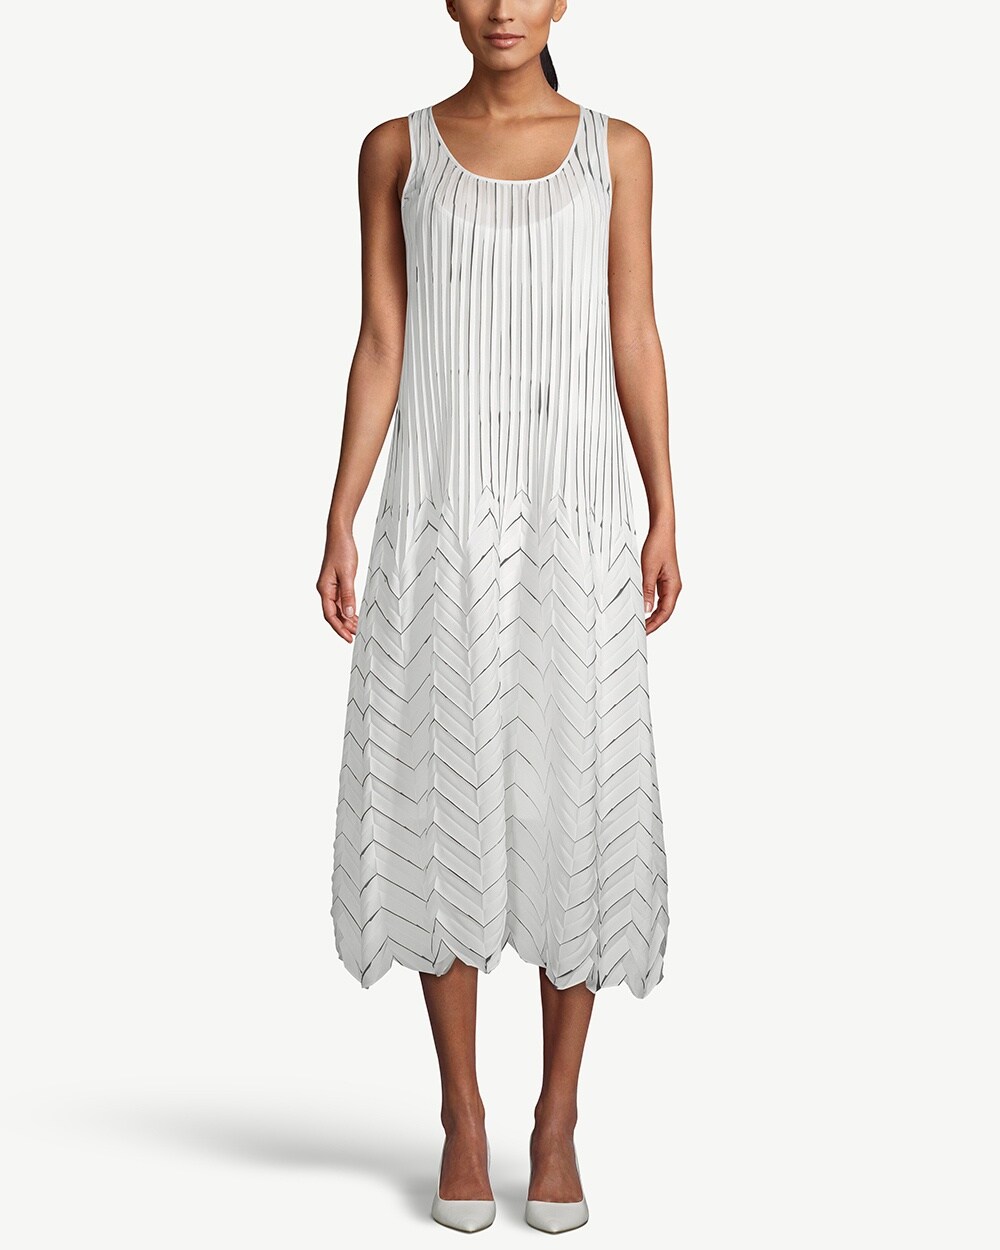 Travelers Collection Pleated Sleeveless Dress